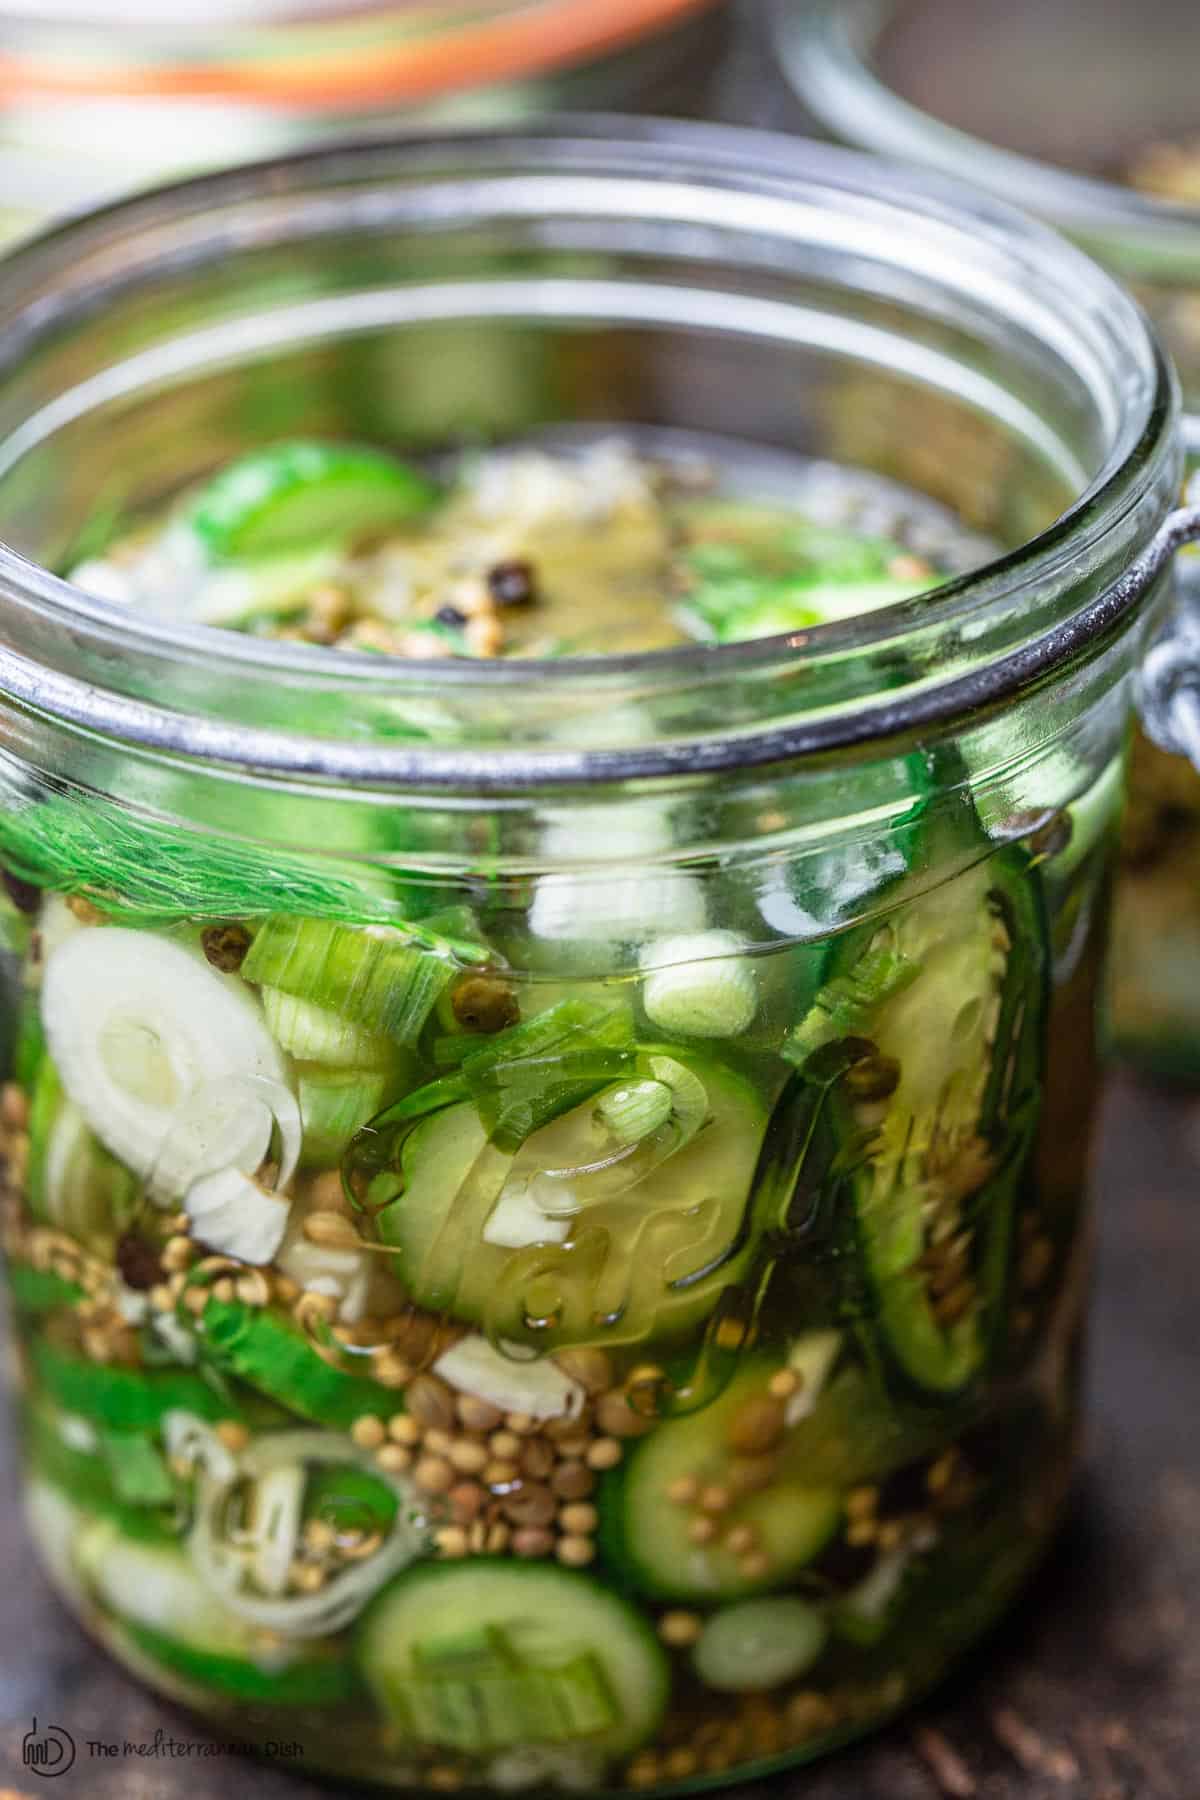 Quick Pickled Cucumber How To Pickle Cucumbers The Mediterranean Dish